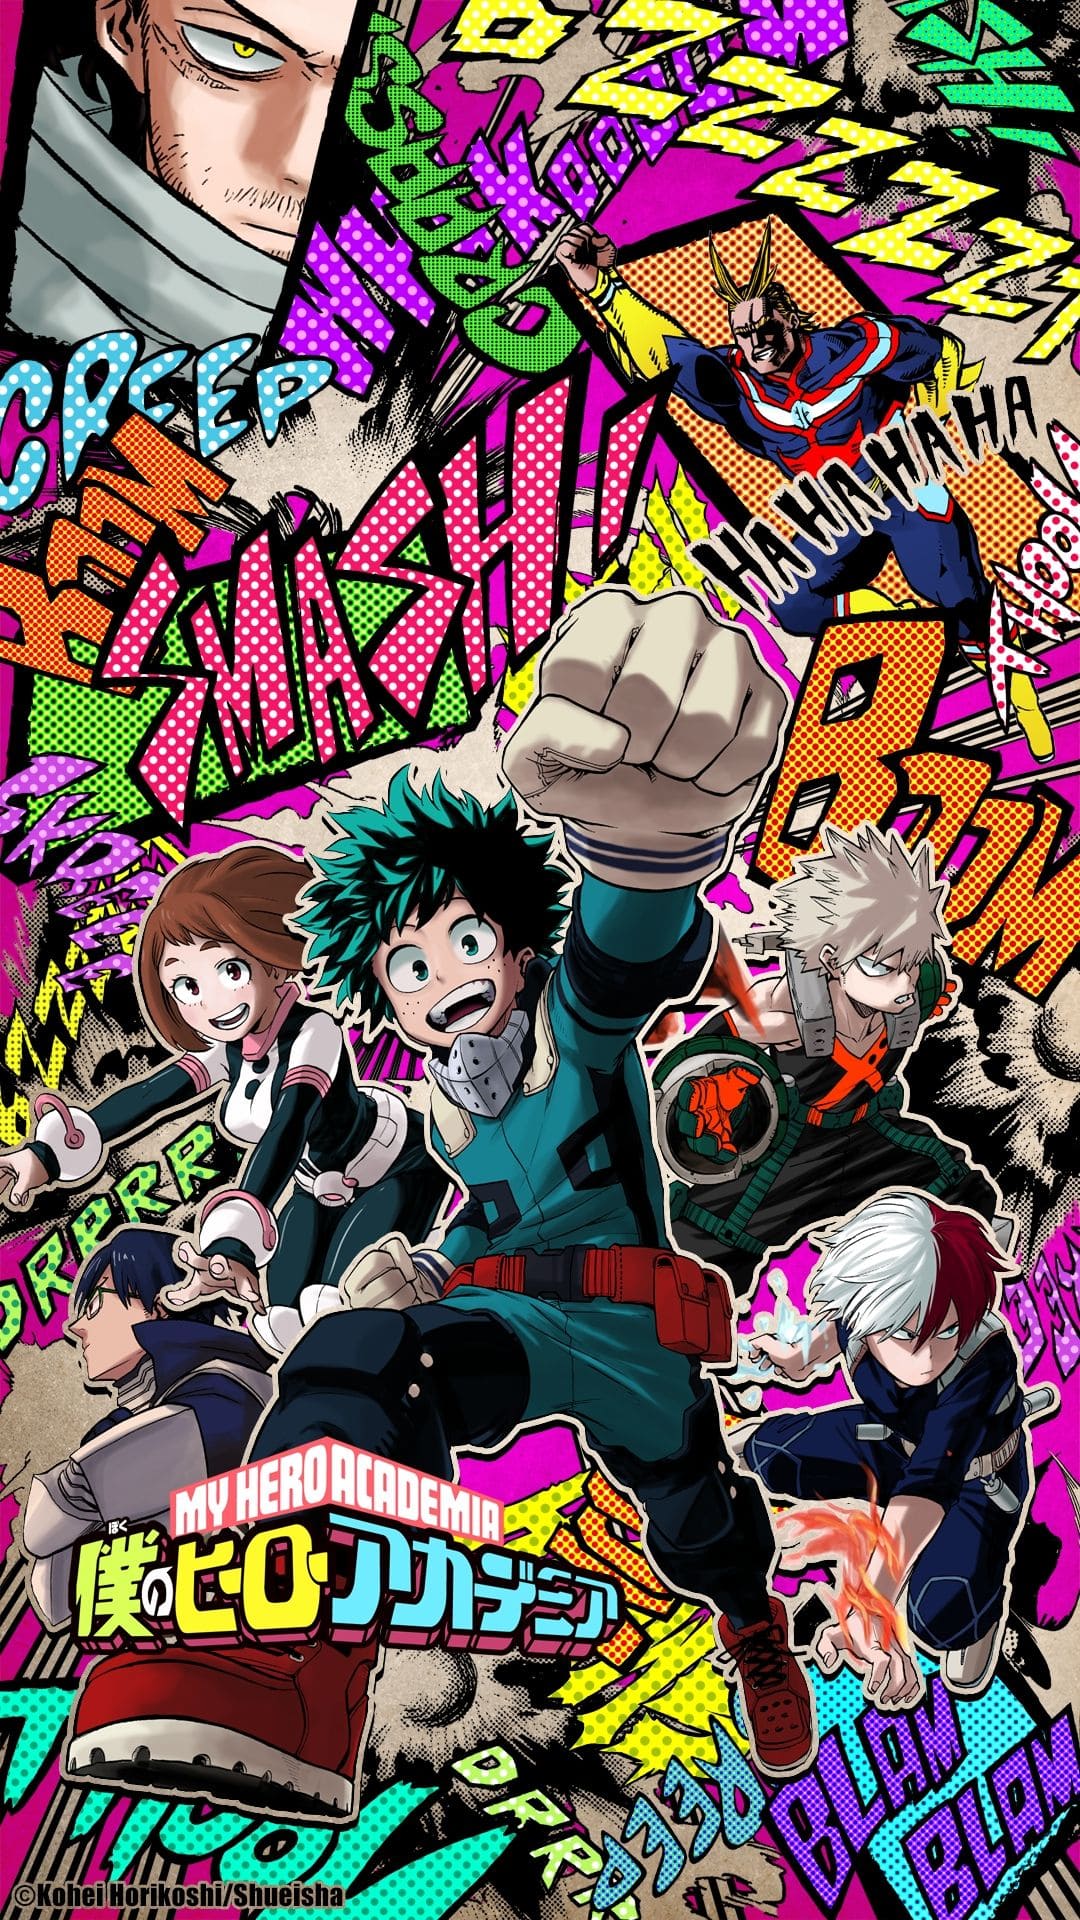 Boku no Hero Academia iPhone Wallpaper with high-resolution 1080x1920 pixel. You can use this wallpaper for your iPhone 5, 6, 7, 8, X, XS, XR backgrounds, Mobile Screensaver, or iPad Lock Screen - My Hero Academia